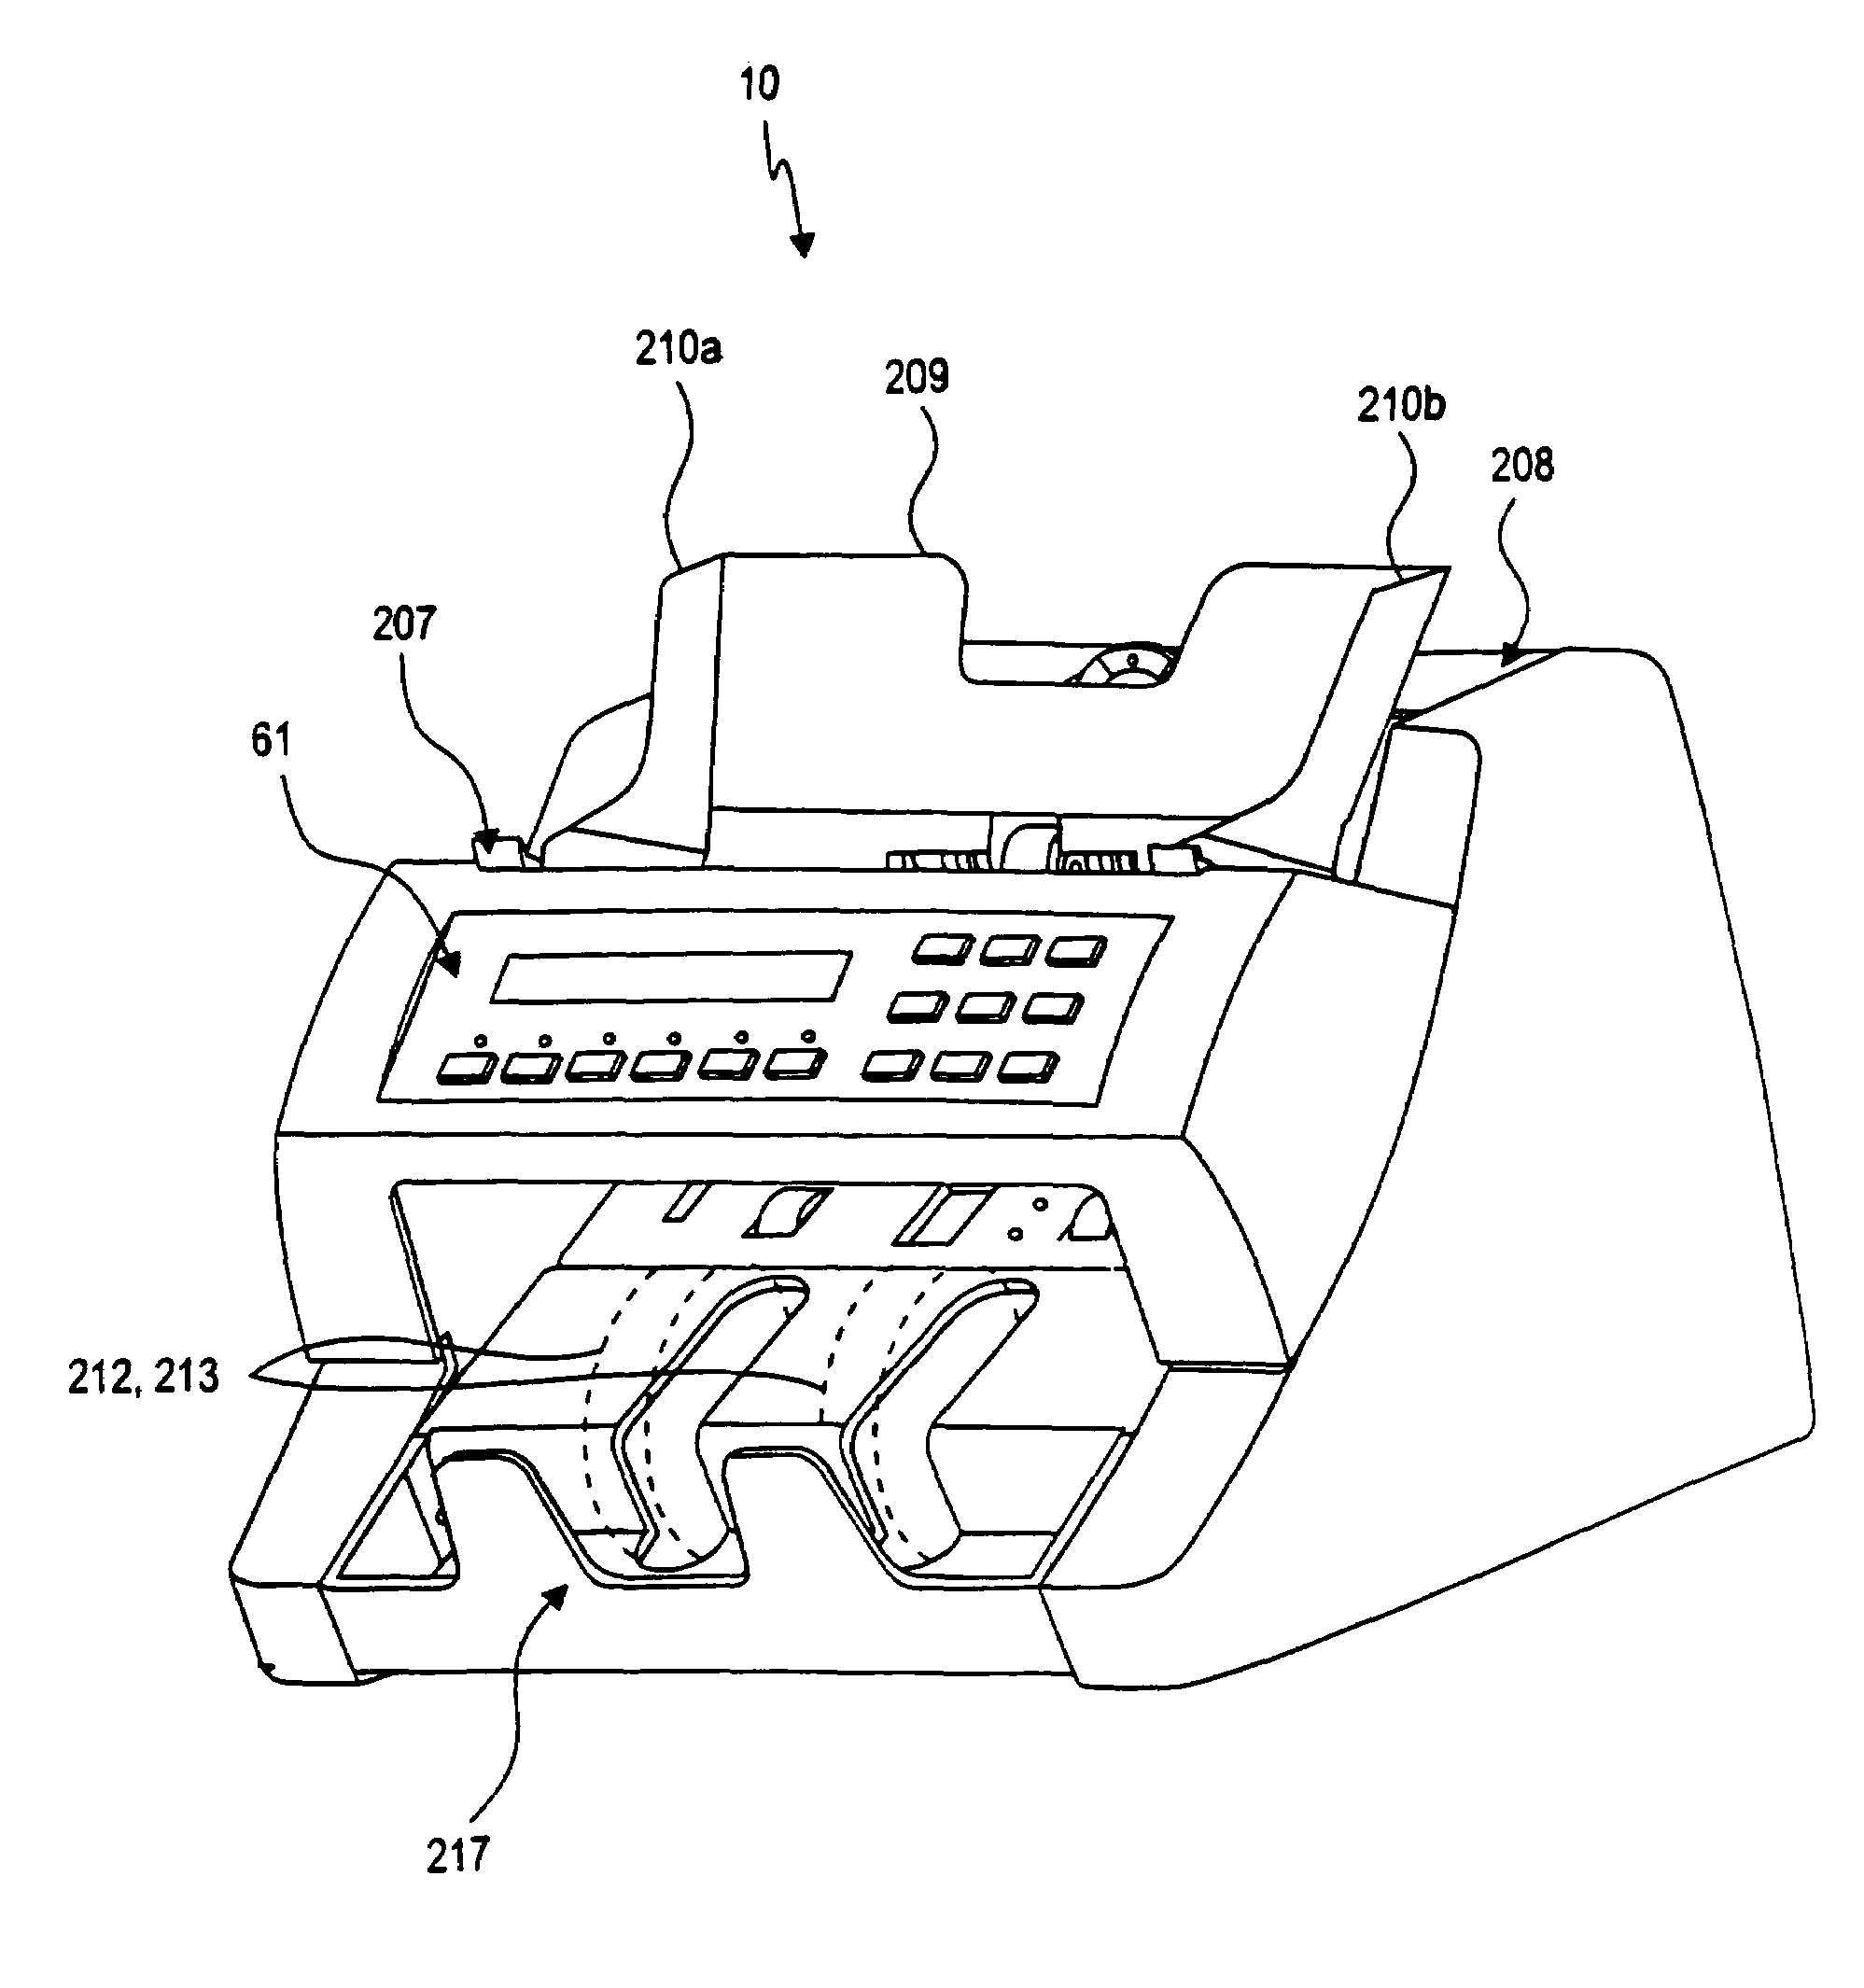 Method and apparatus for discriminating and counting documents